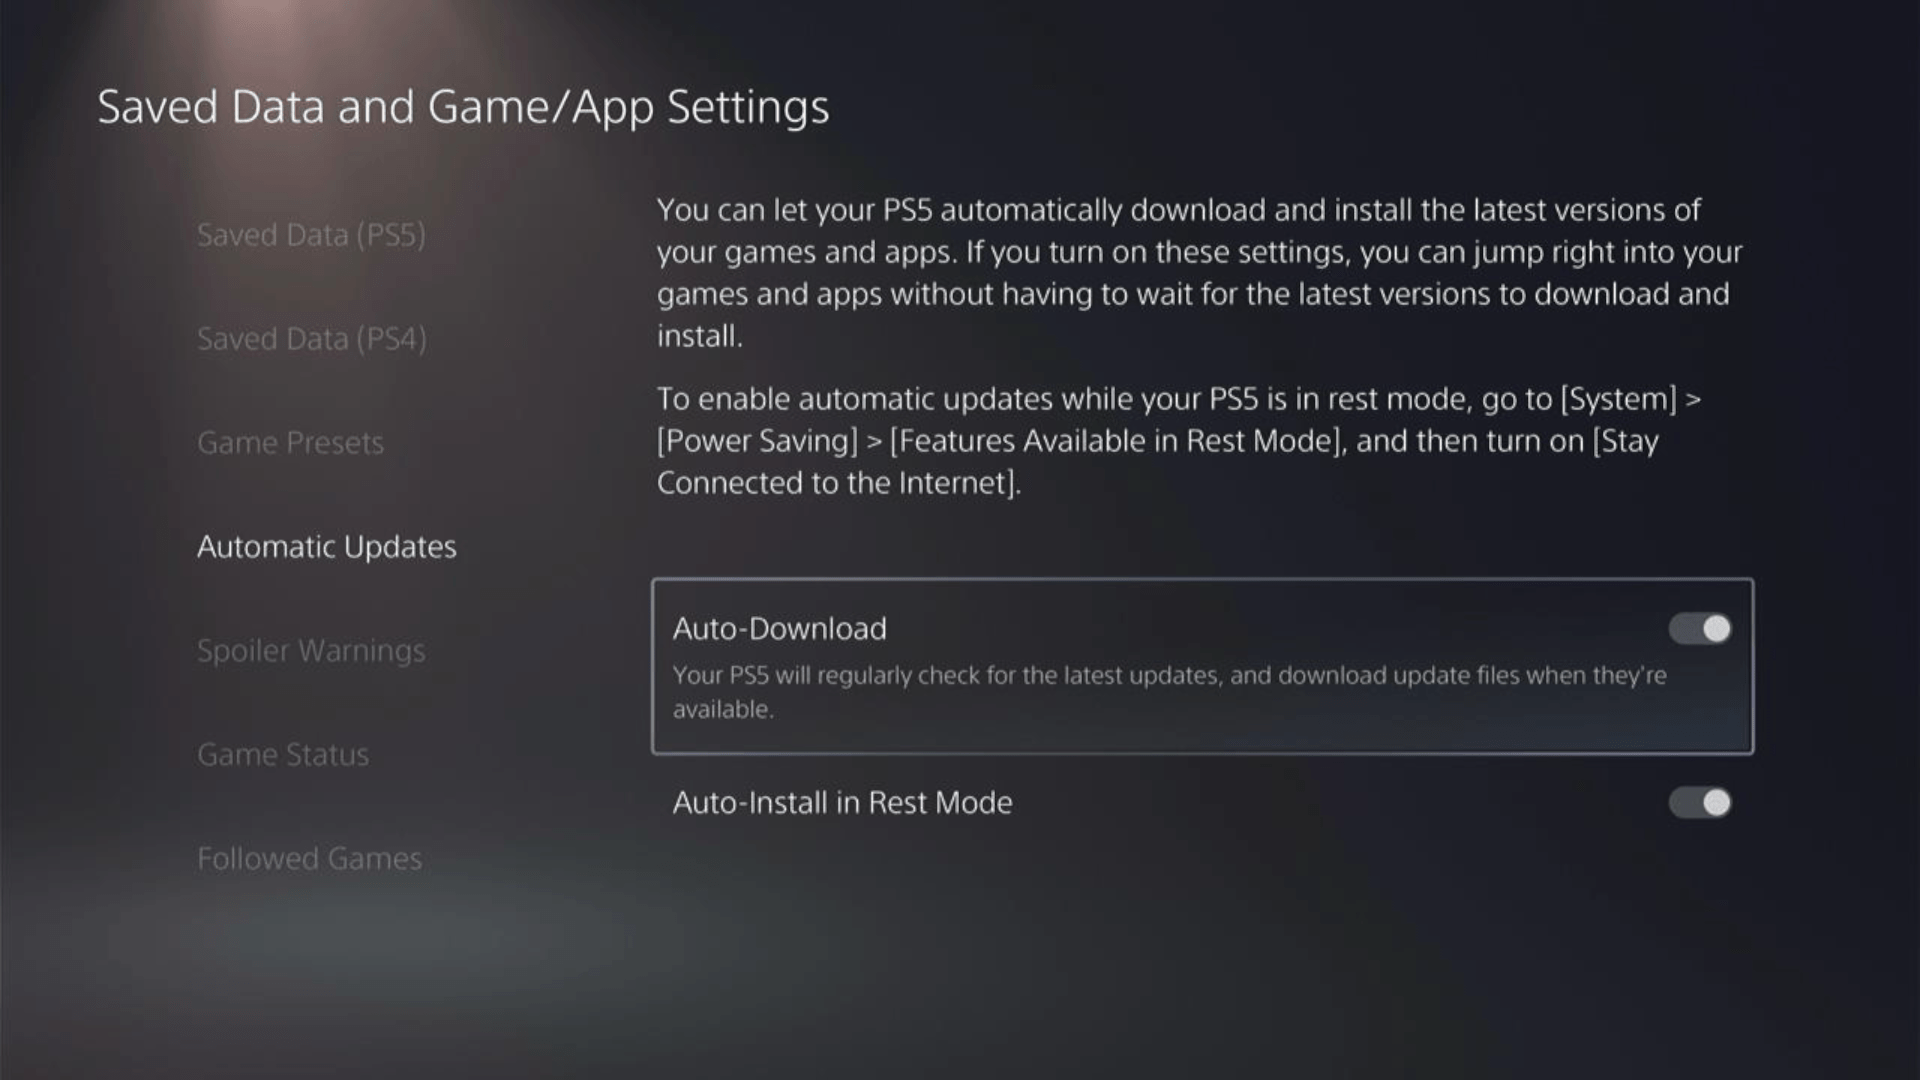 In the Saved Data and Game/App Settings window, select Automatic Updates from the left sidebar to enable automatic game updates to avoid black screen